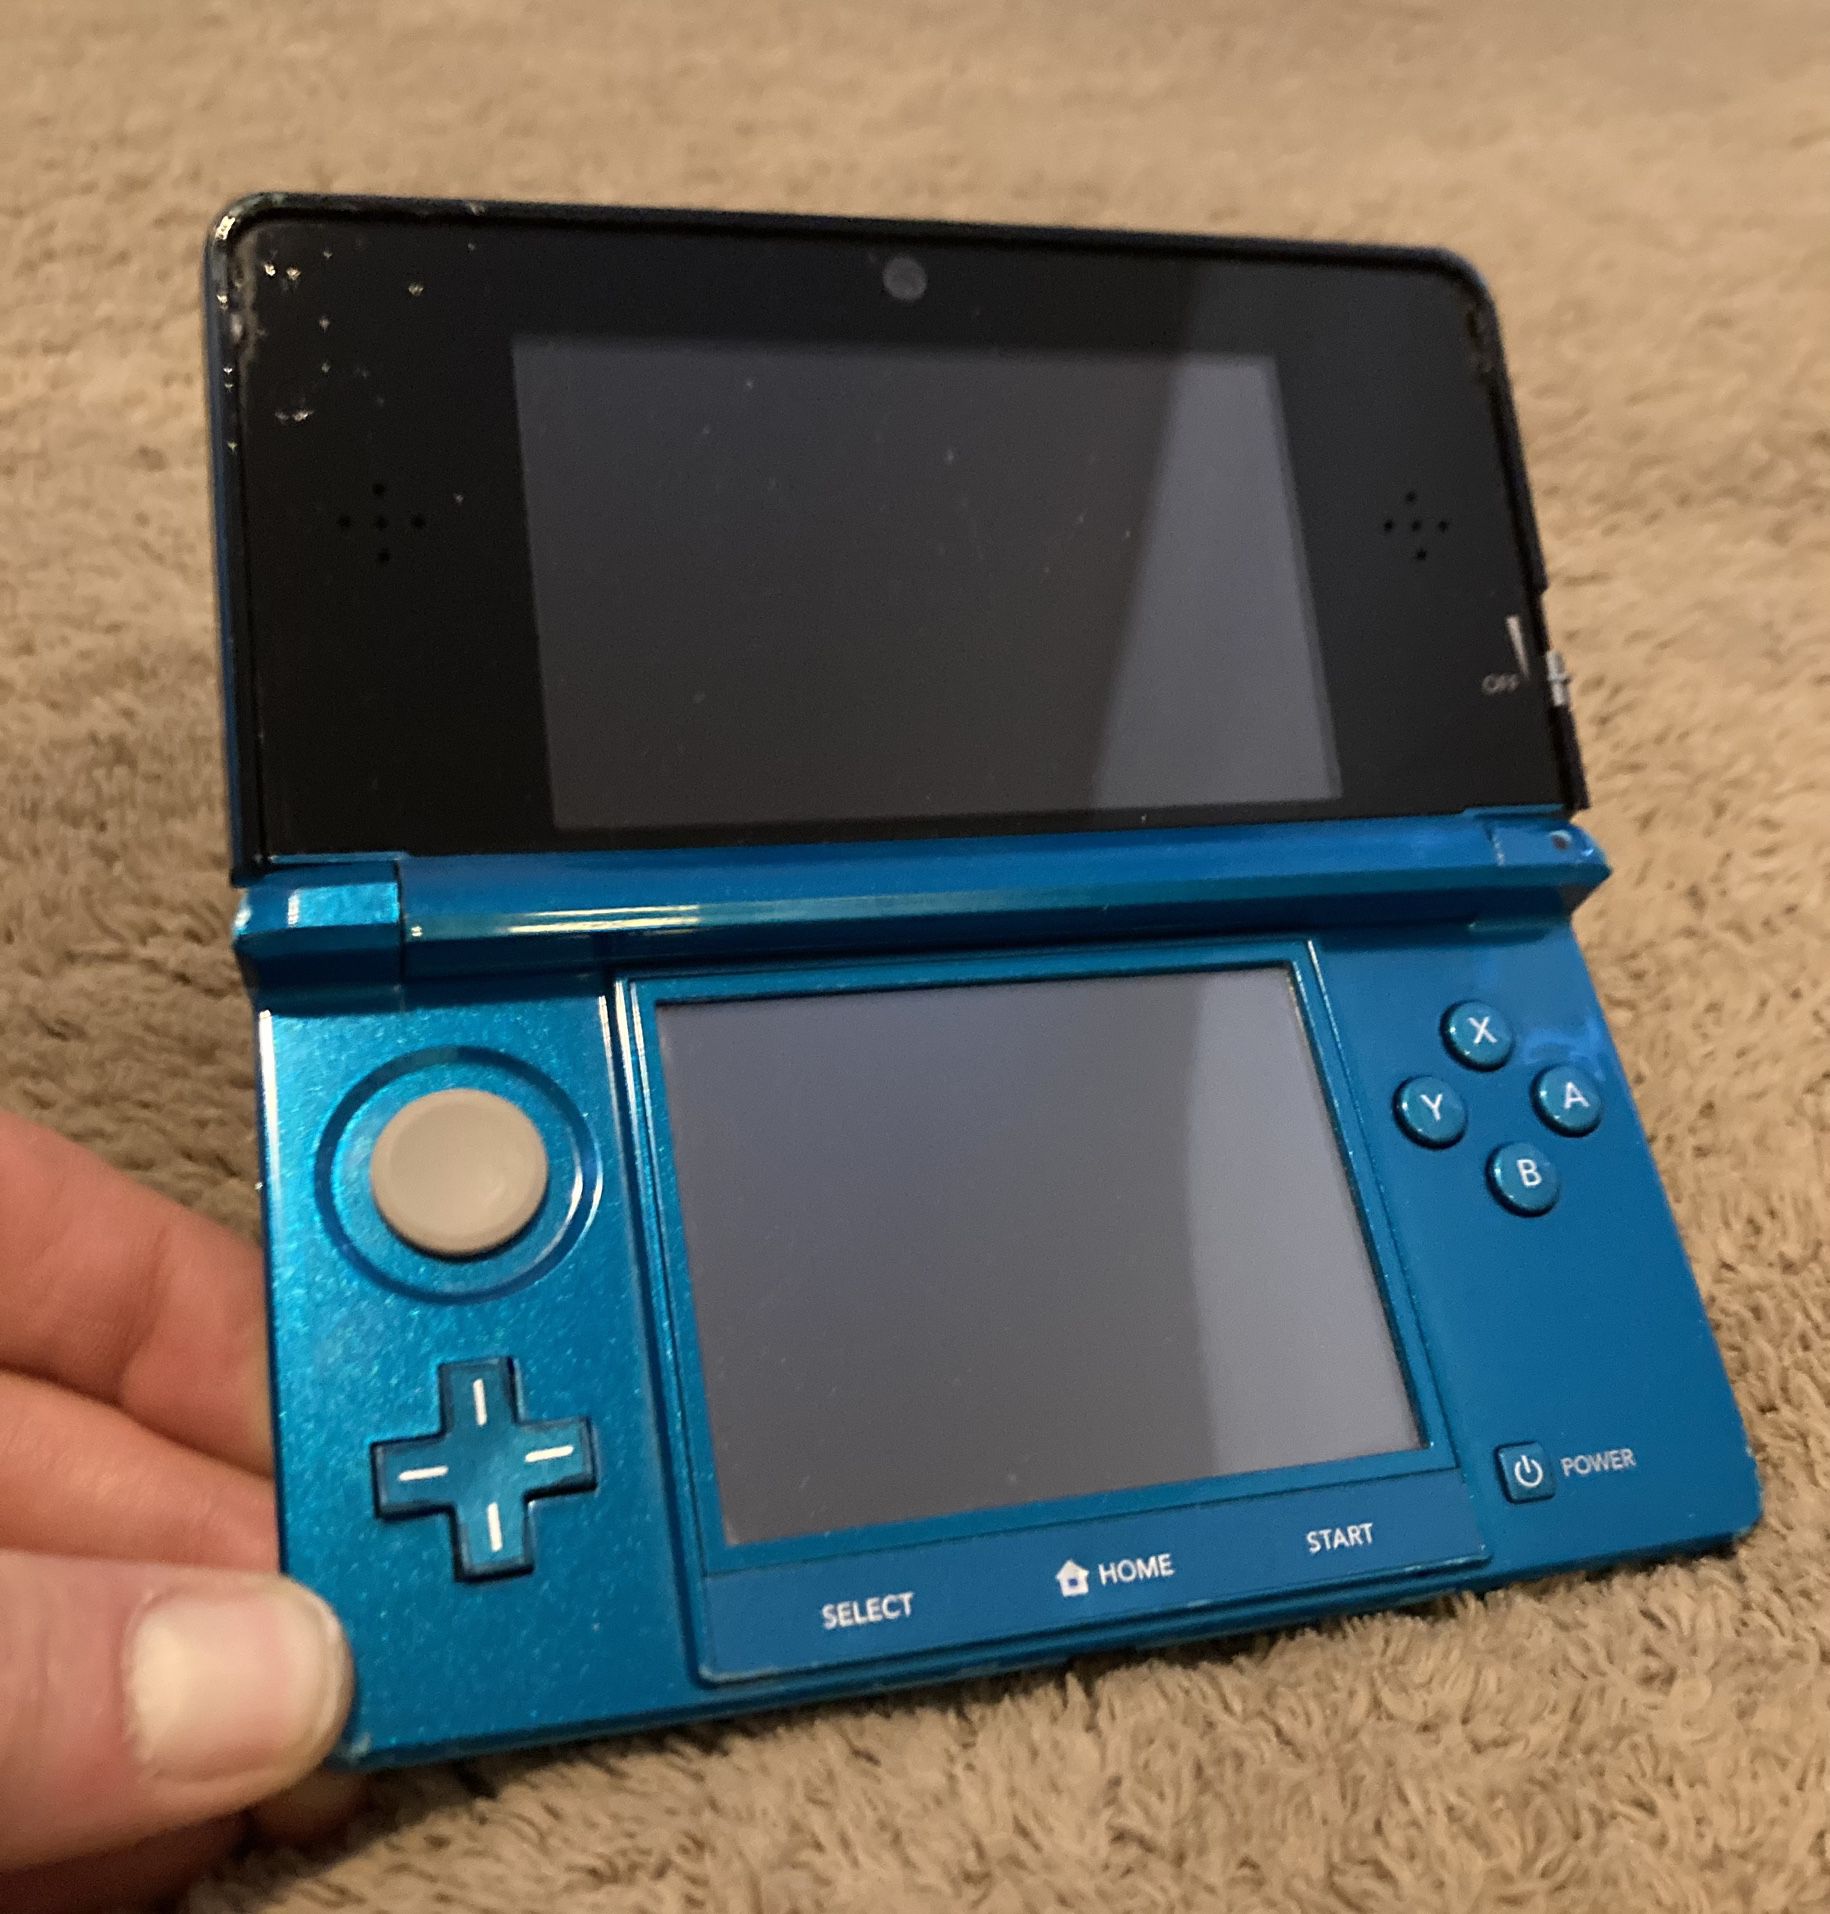 Nintendo 3DS Aqua Blue With Charger Modded With Pre Installed Games Offers Welcome